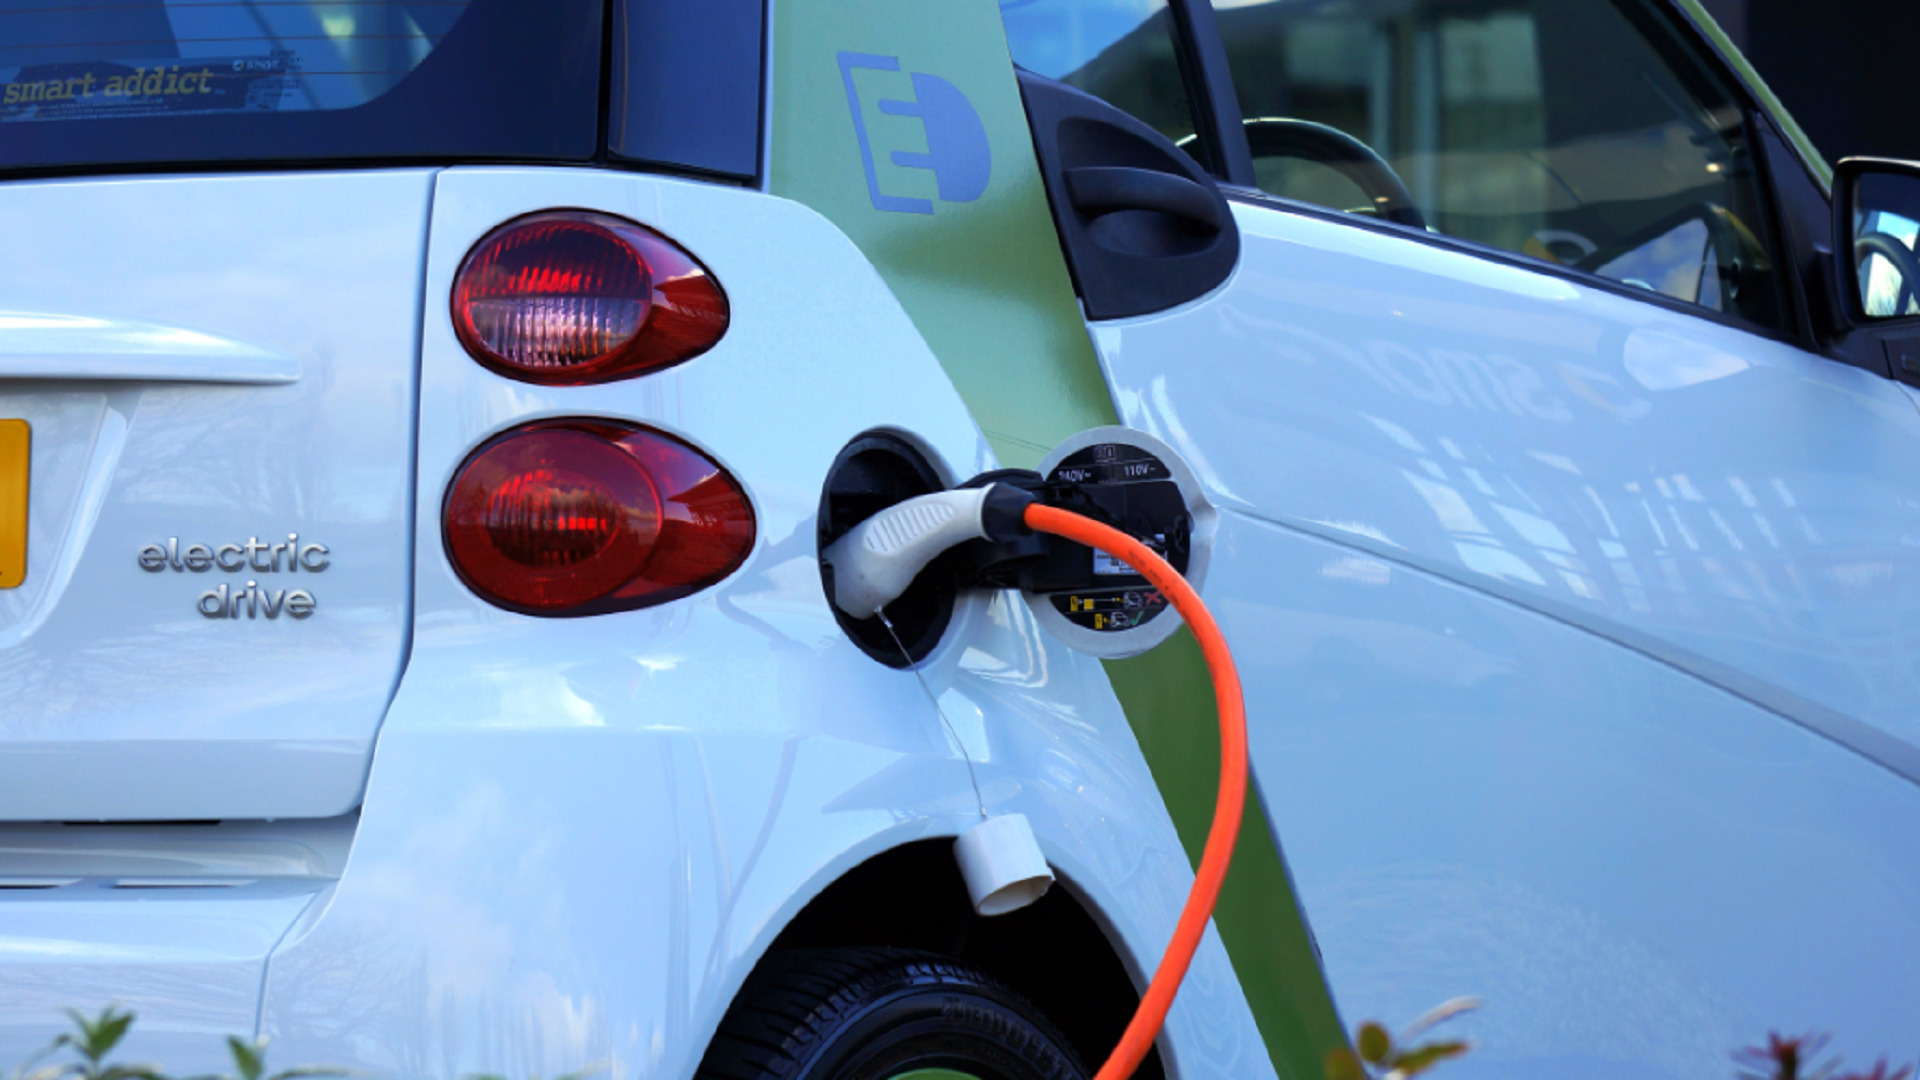 Around 50% of EV drivers in California switch to gasoline